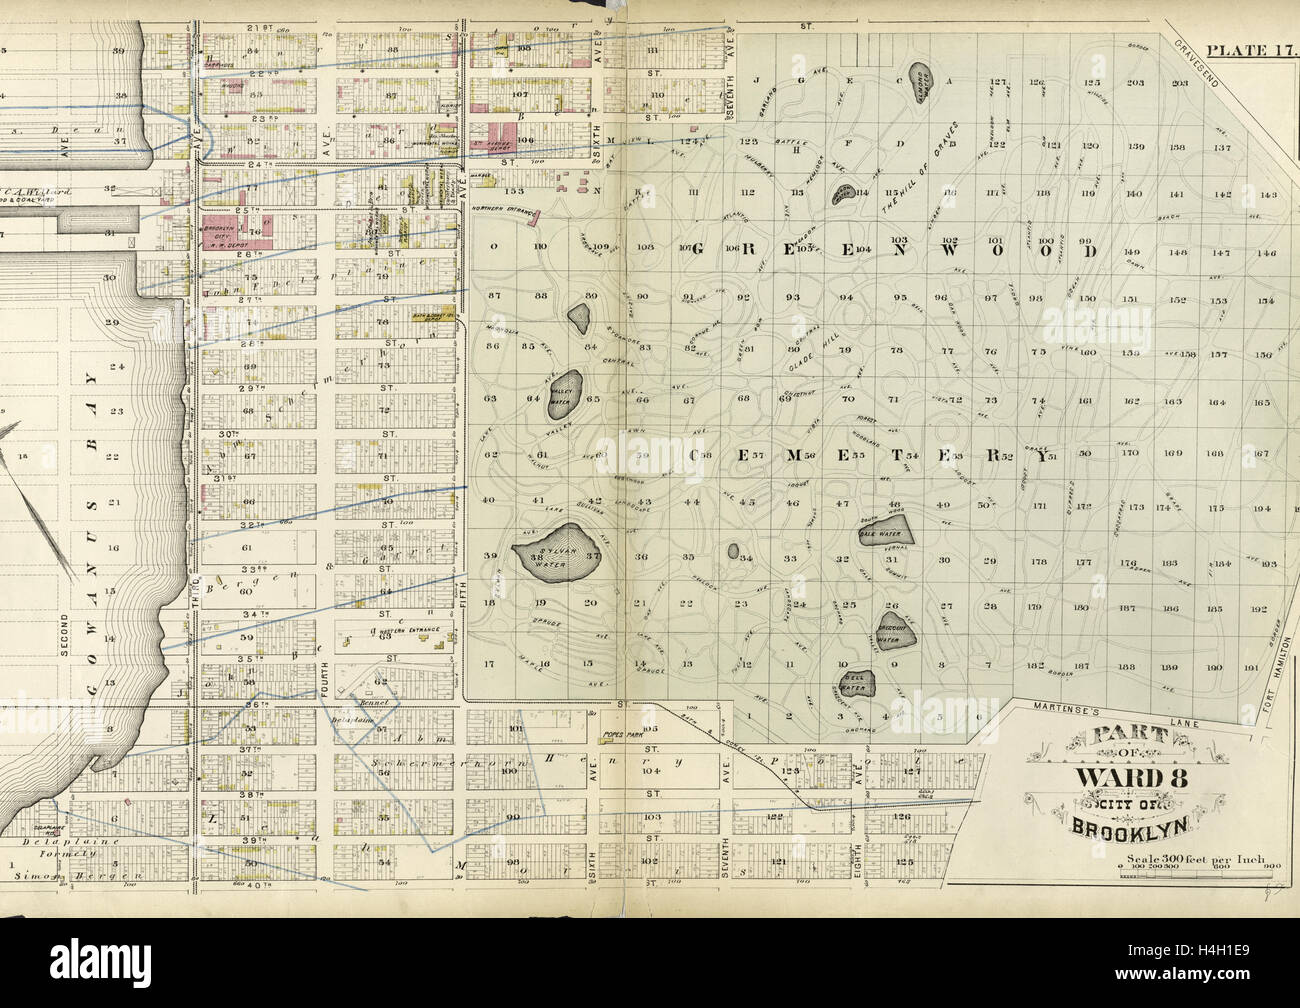 Plate 17: Part of Ward 8 City of Brooklyn, New York, USA Stock Photo